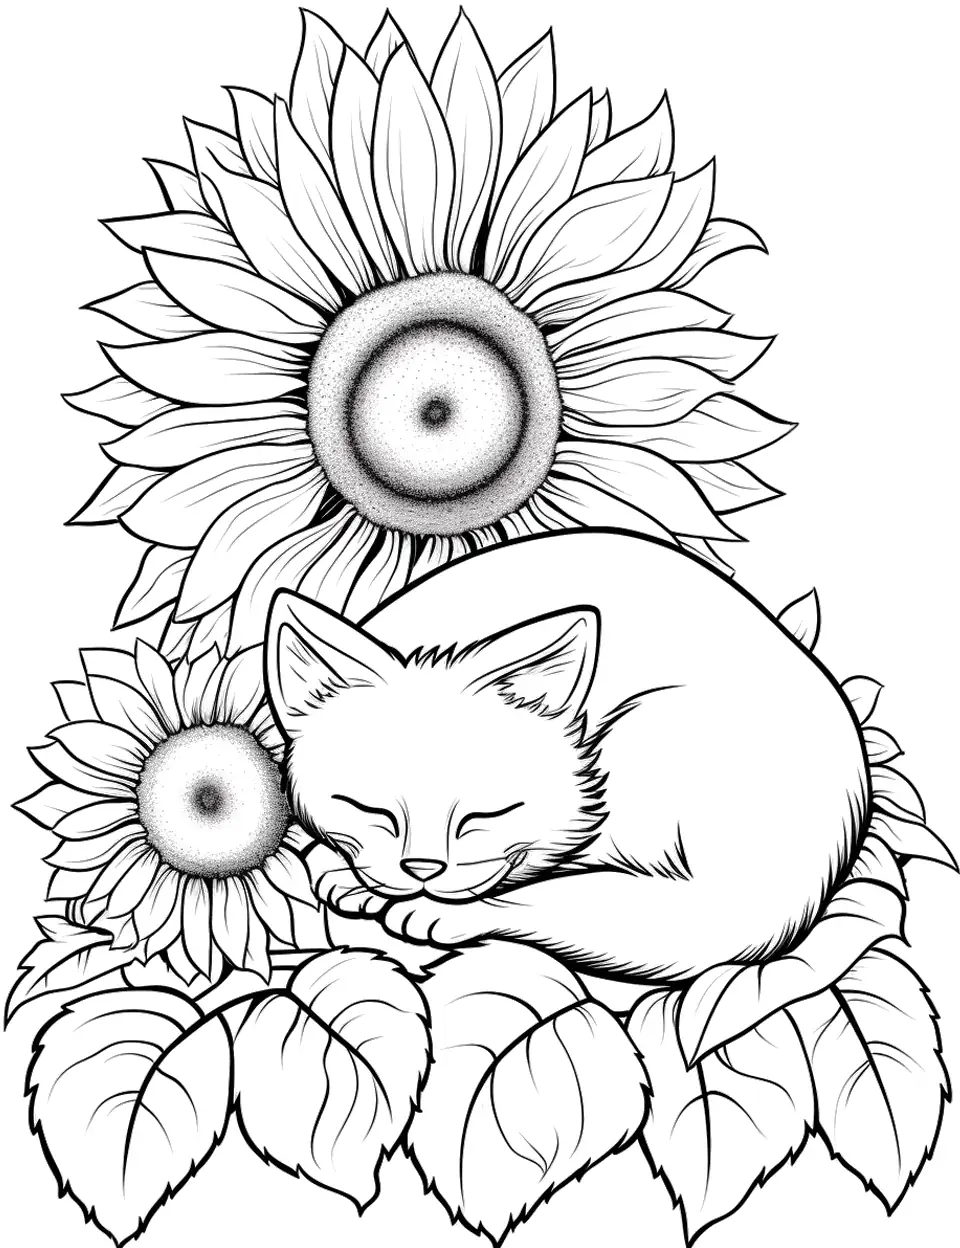 Cat Sleeping Under Sunflower Coloring Page - A cat napping peacefully under the shade of a sunflower.